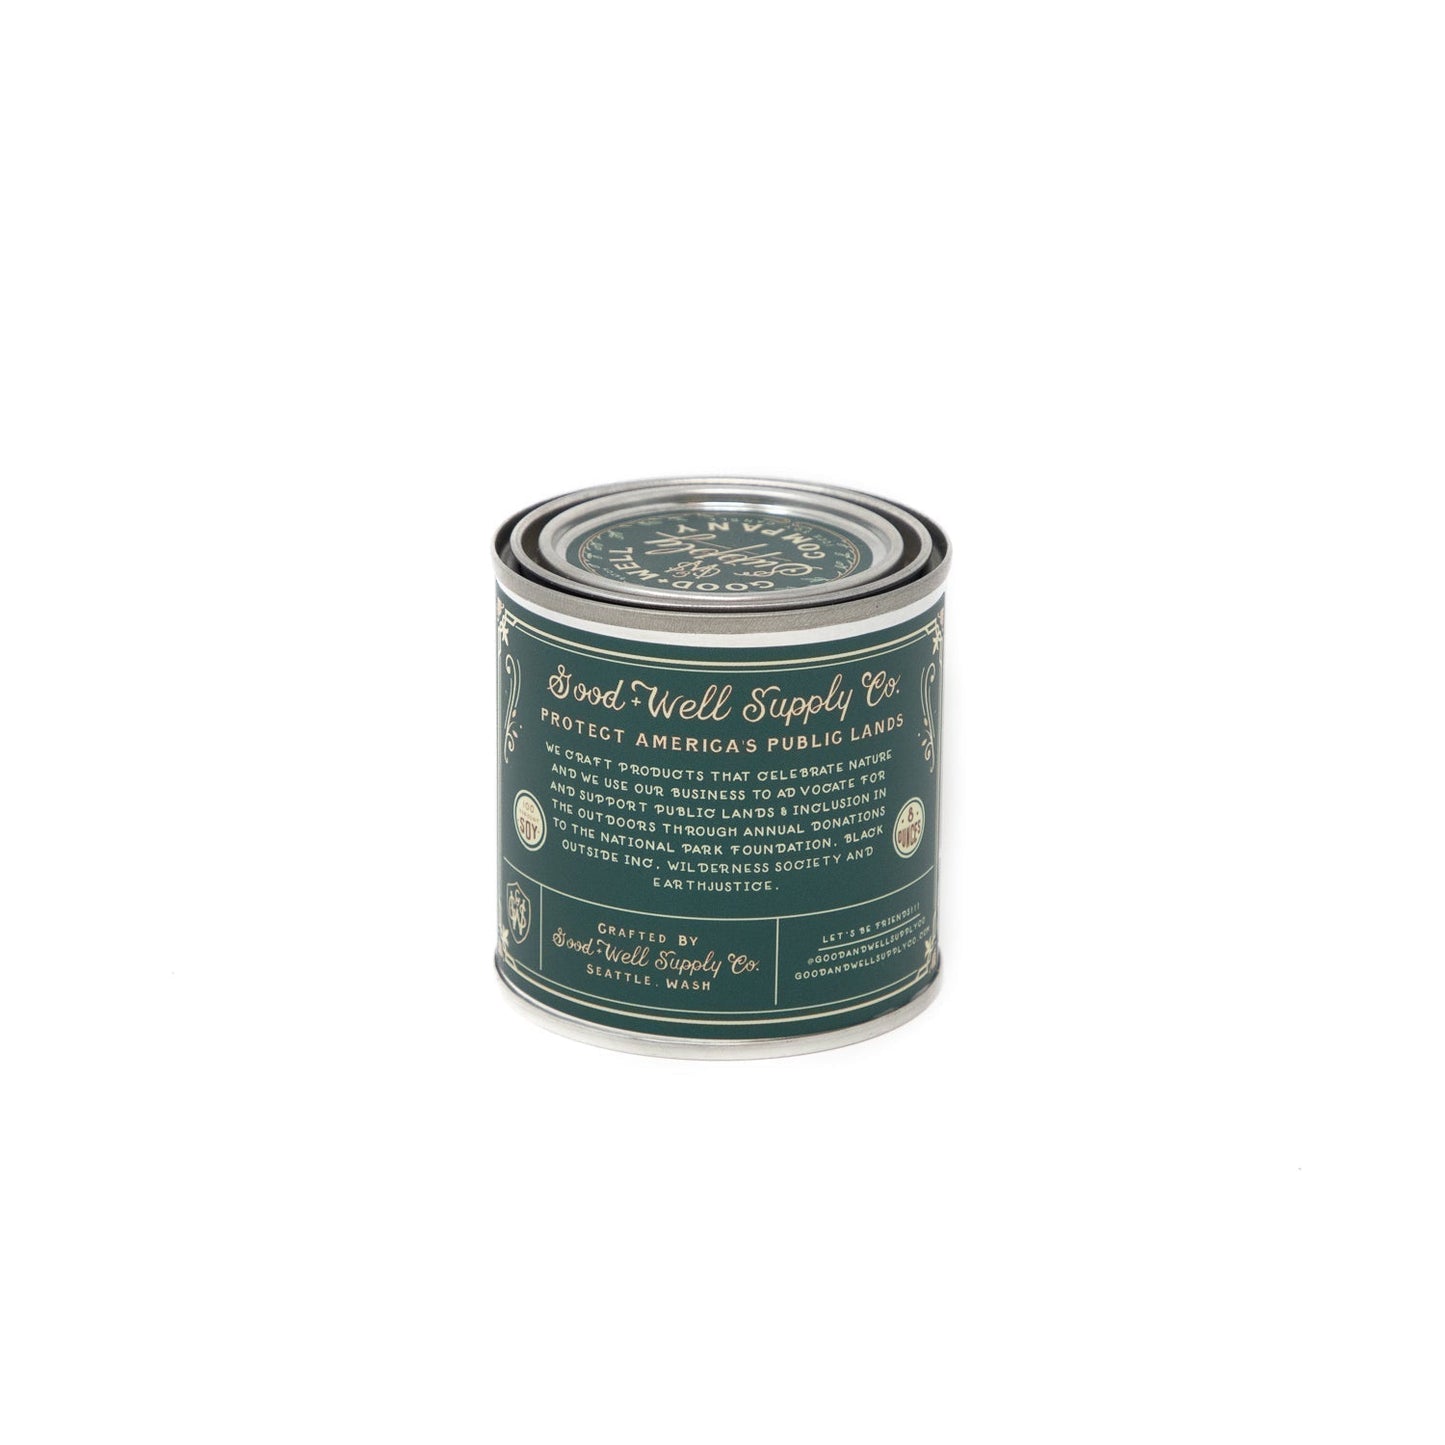 Continental Divide Scenic Trails Candle